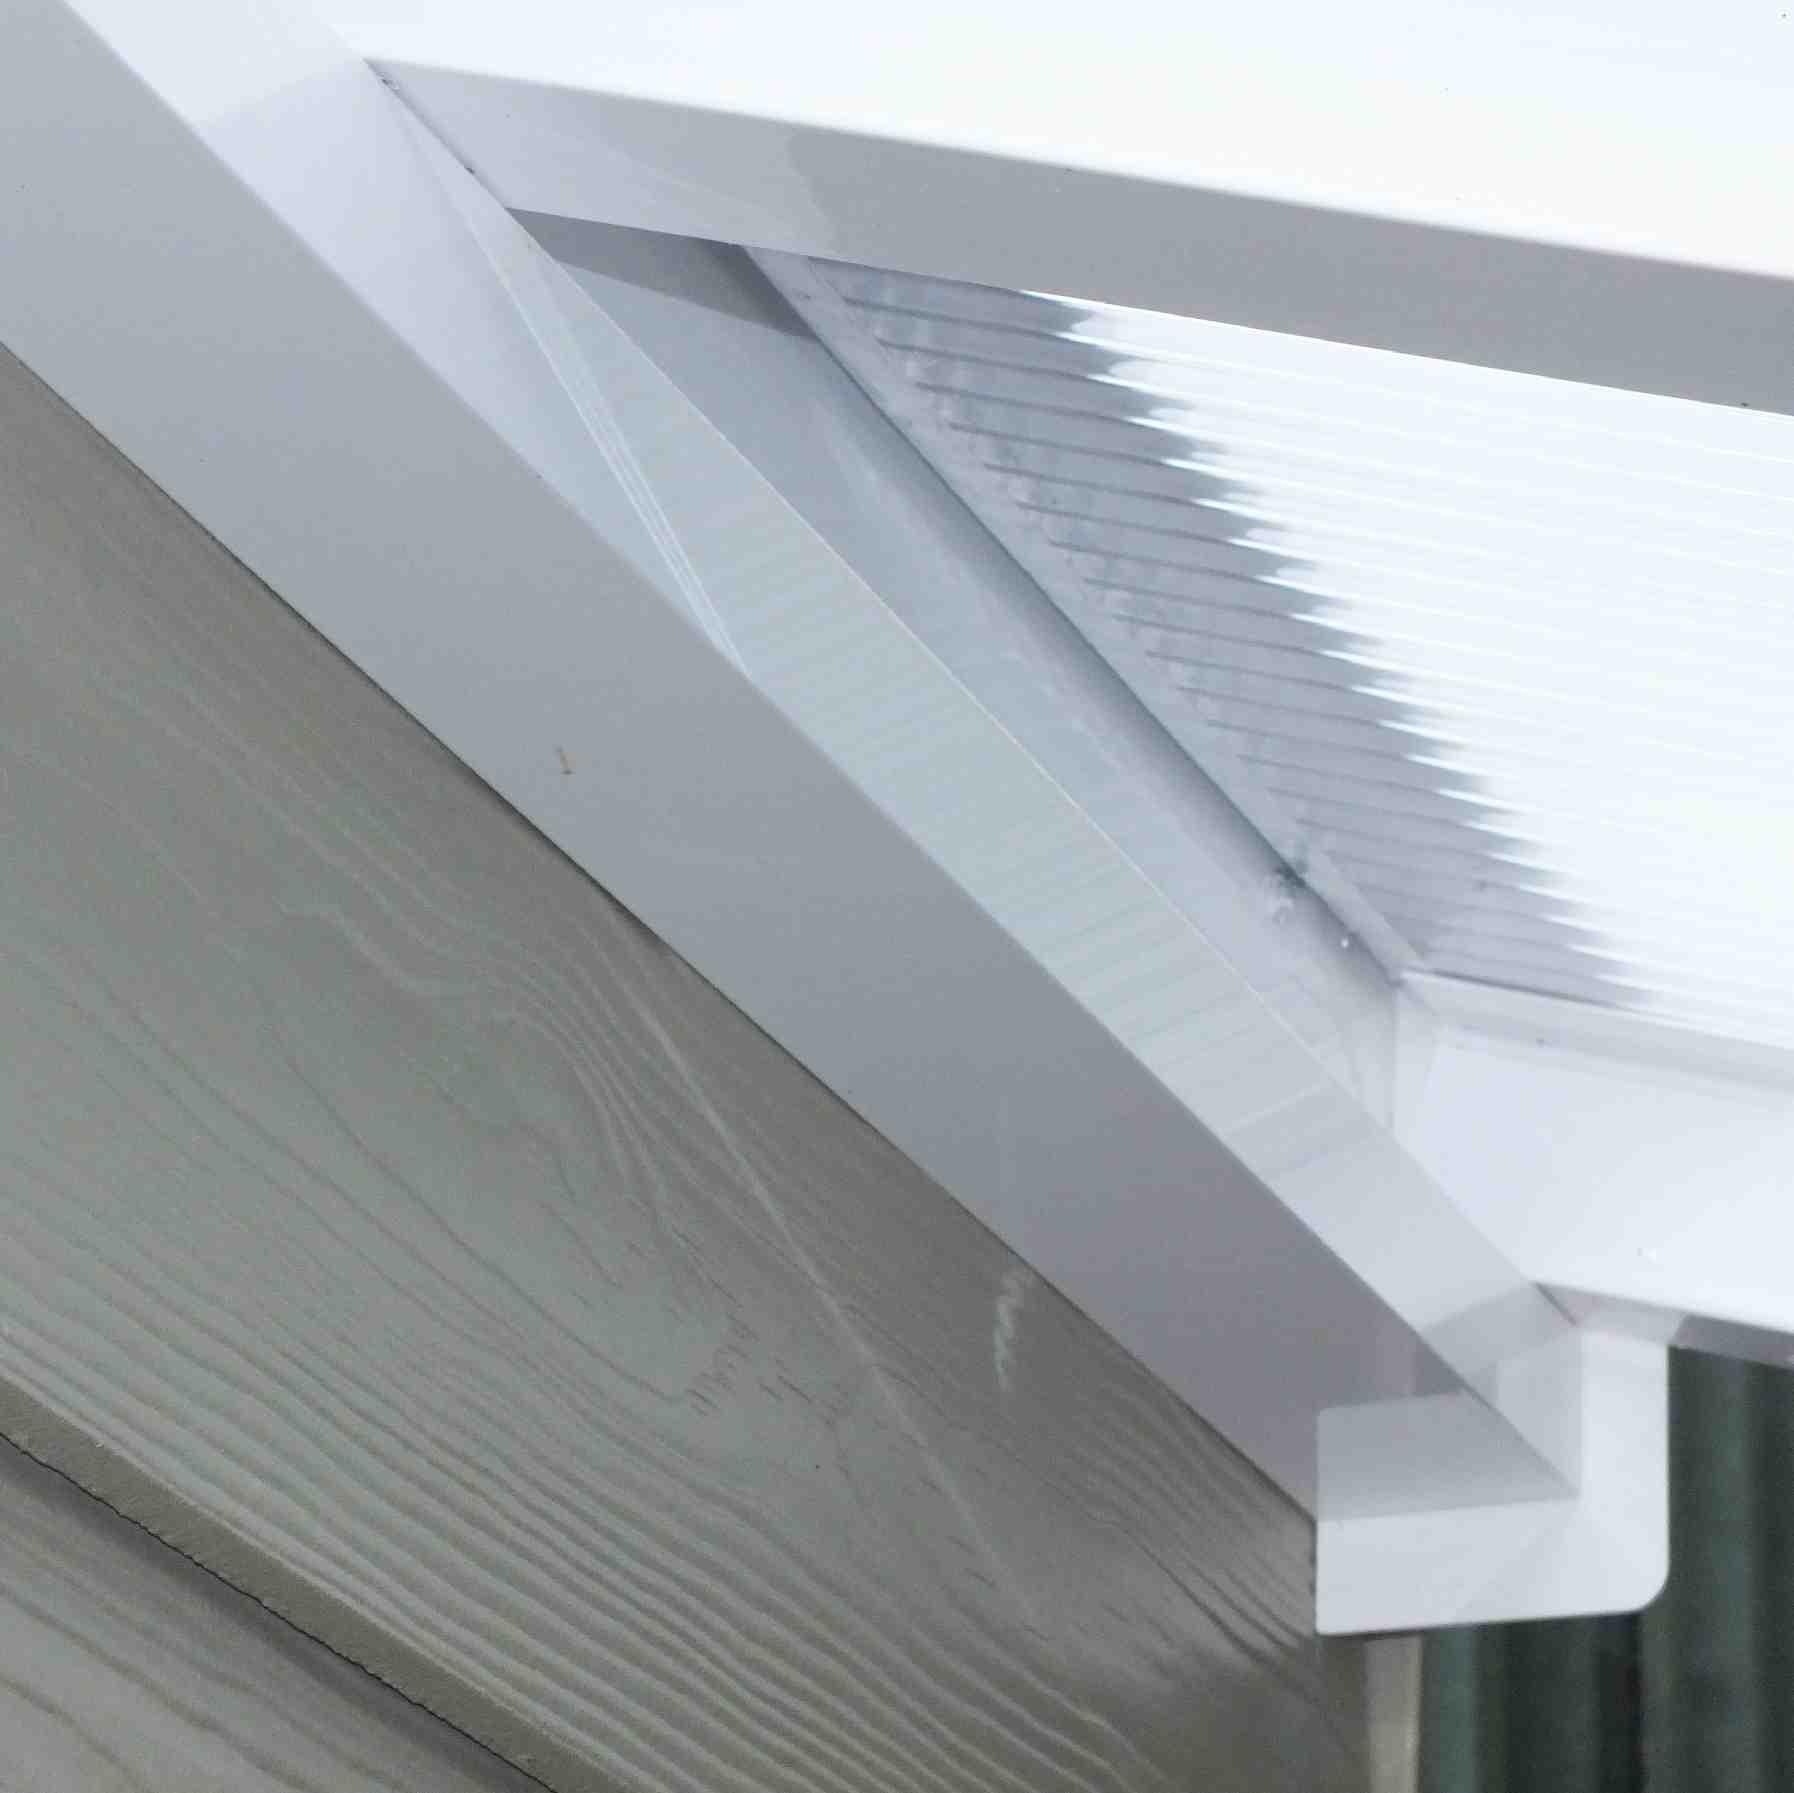 Great deals on Omega Verandah White with 16mm Polycarbonate Glazing - 6.3m (W) x 3.0m (P), (4) Supporting Posts